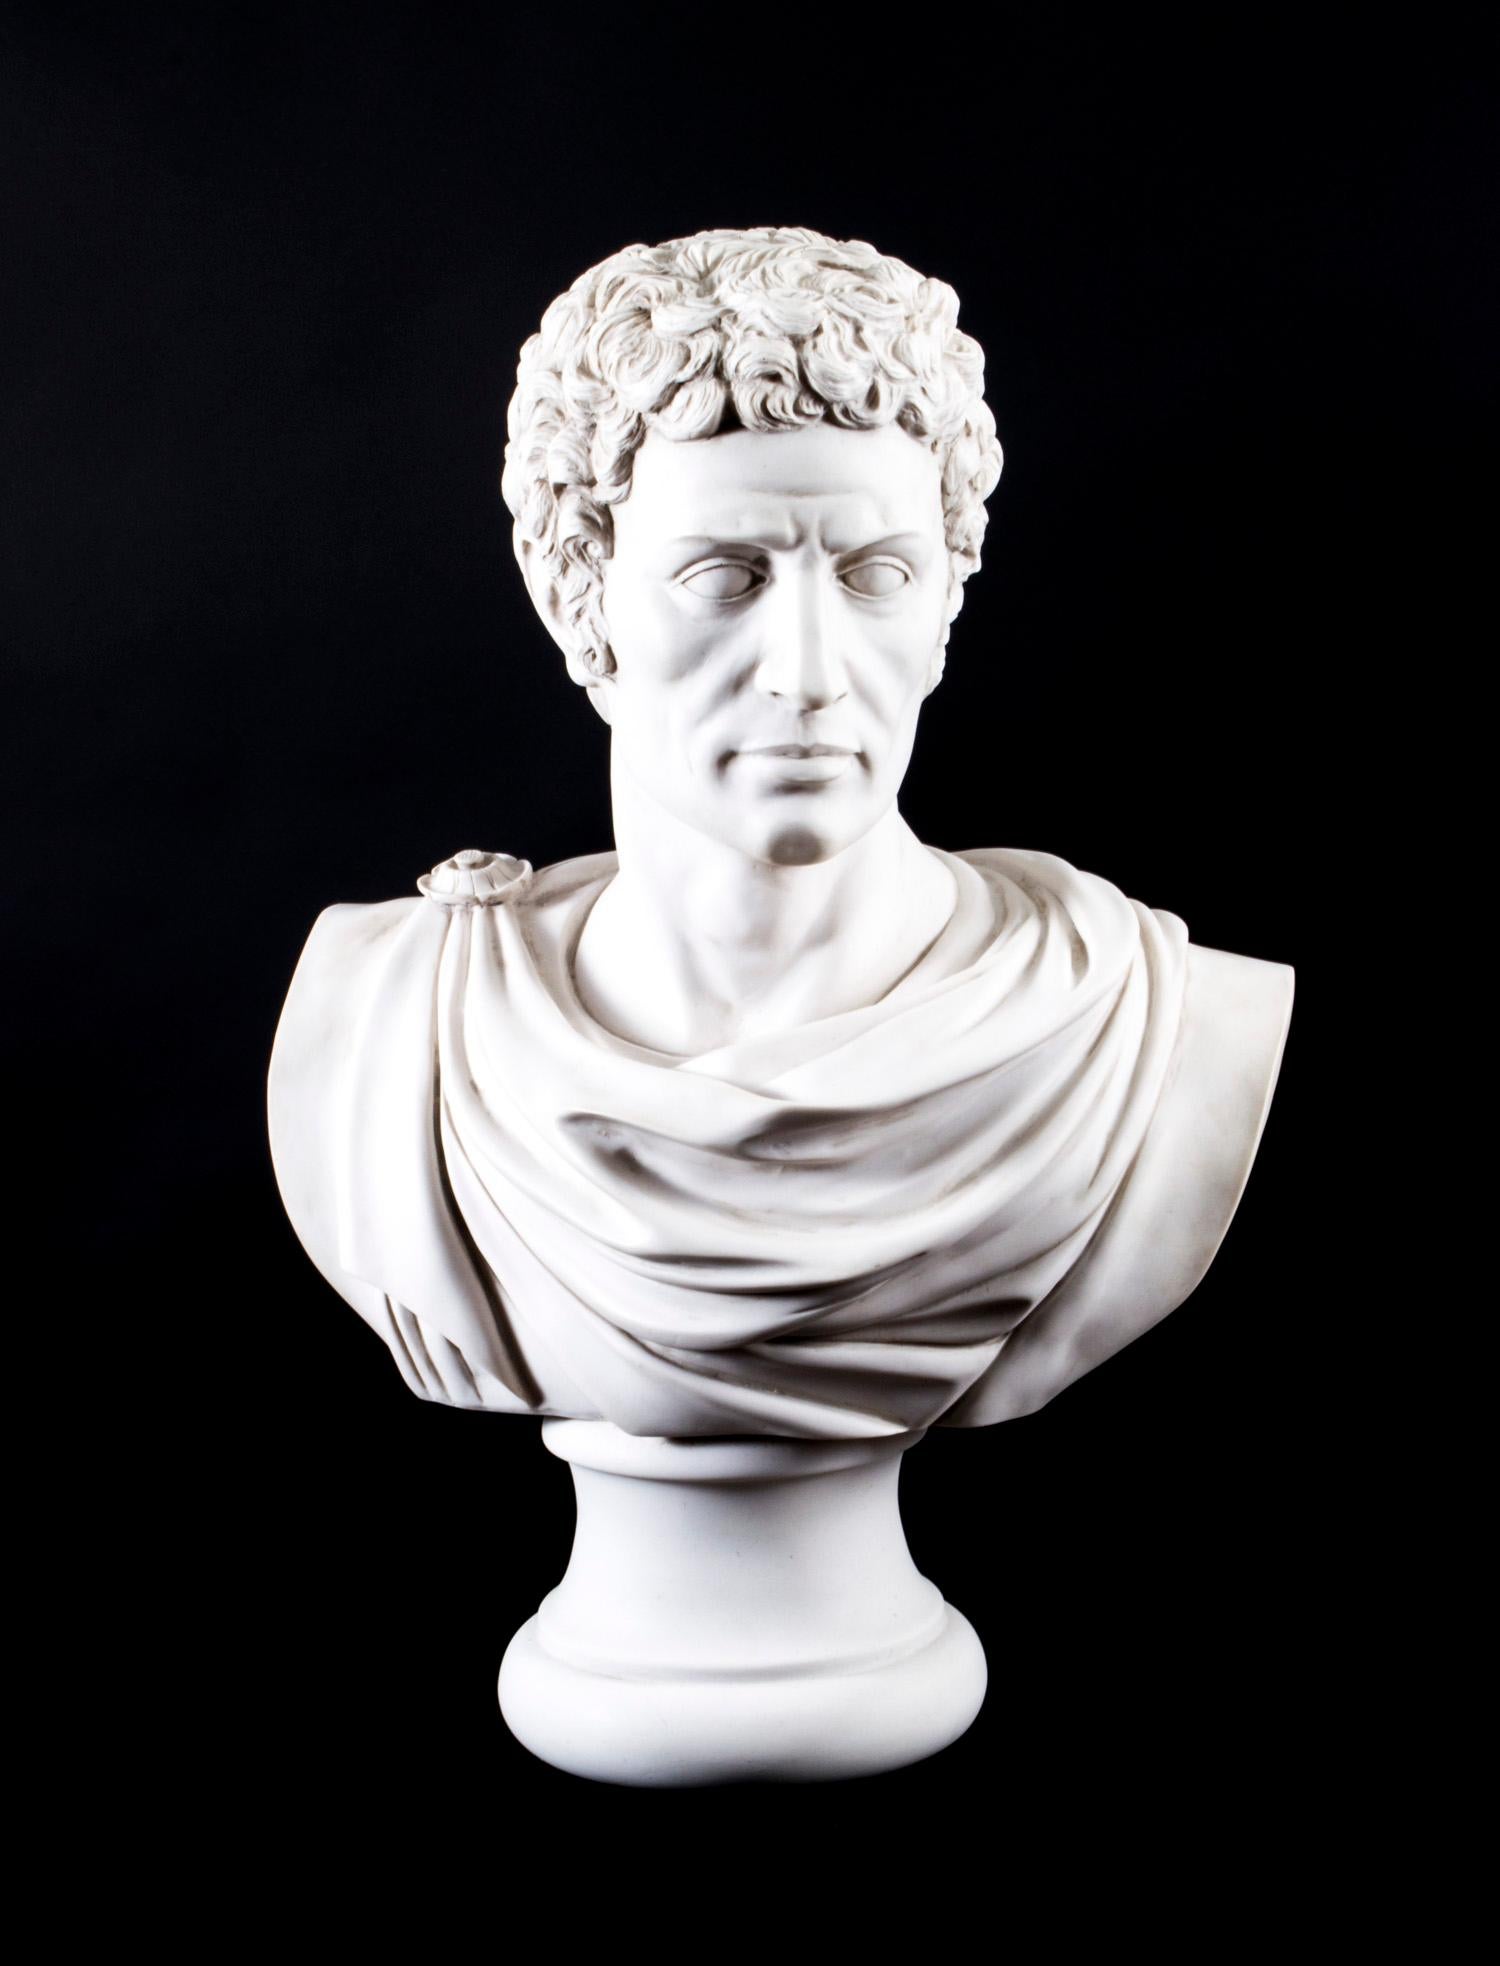 A beautifully sculpted composite marble bust of the famous Roman general Lucius Junius Brutus dating from the last quarter of the 20th century.

He is waering a flowing toga with a fibulae or broach holding it in place, on a matching elegant